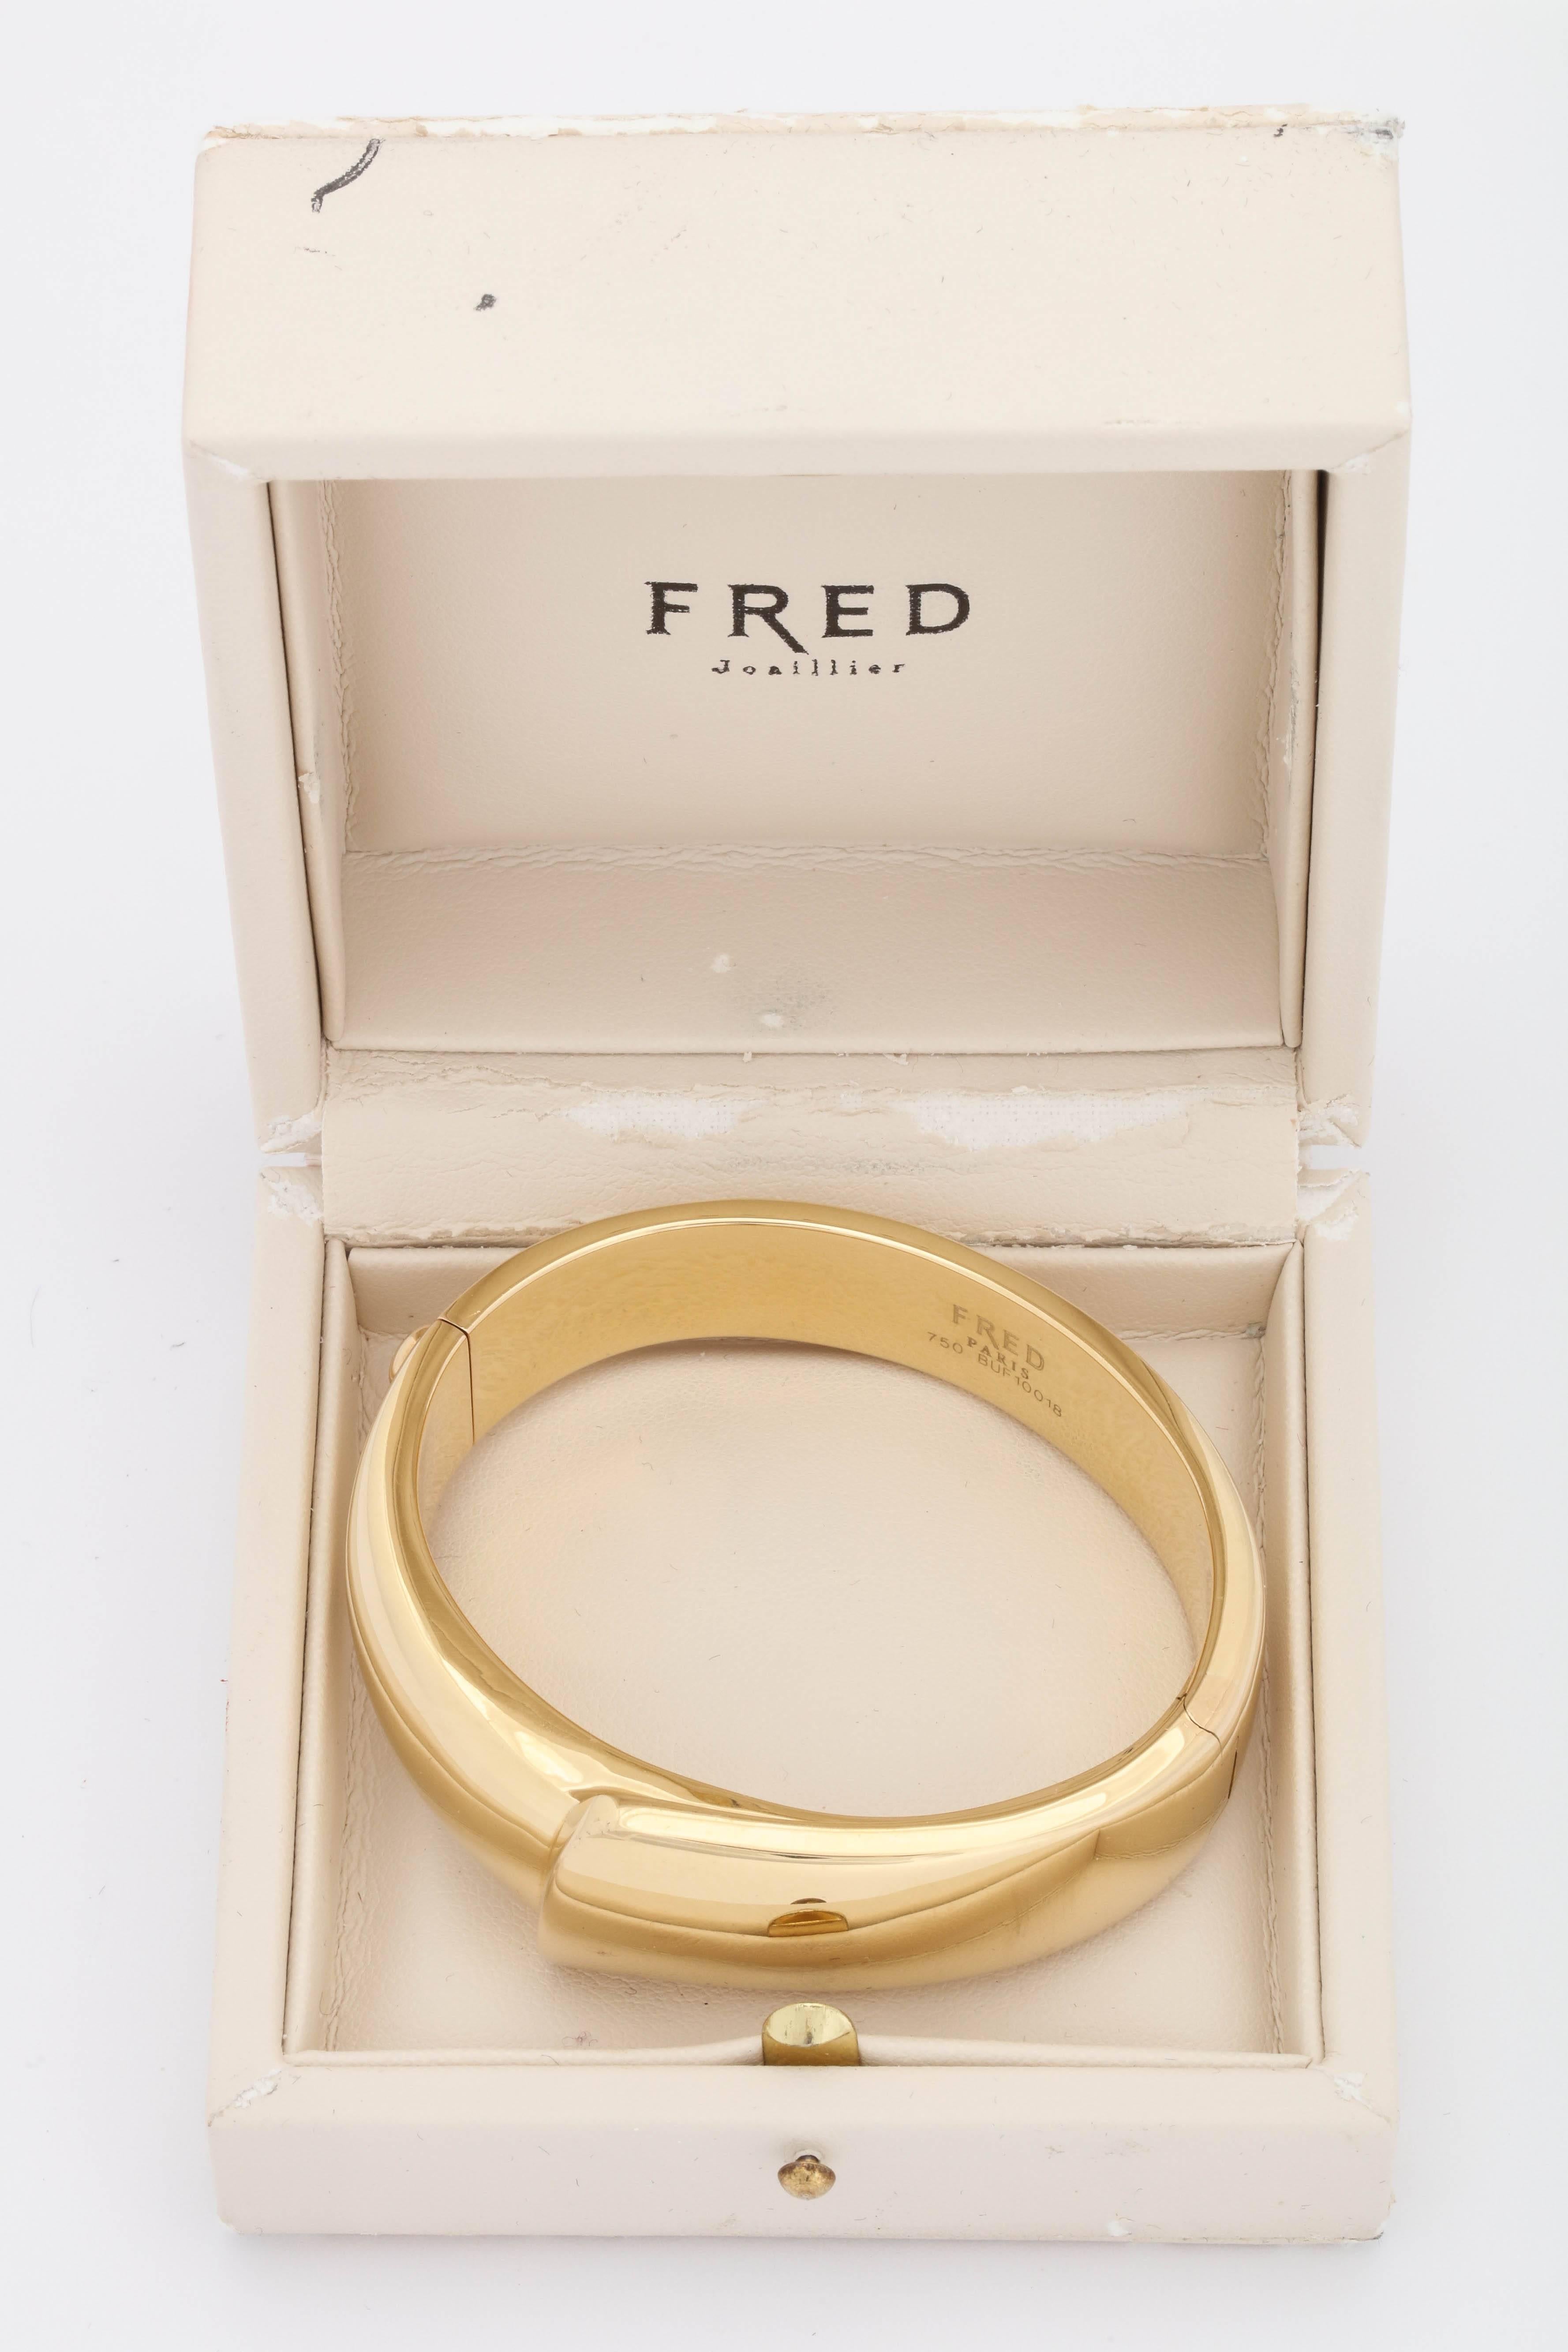 One Ladies 18kt High Polish Yellow Gold Hinged Bangle Bracelet Designed In An Asymmetrical Folded Handkerchief Motif. Designed By Fred Paris In The 1980's In France.Fits An Average Standard Size Wrist This Bracelet Is The Epitome Of Chic And Highly